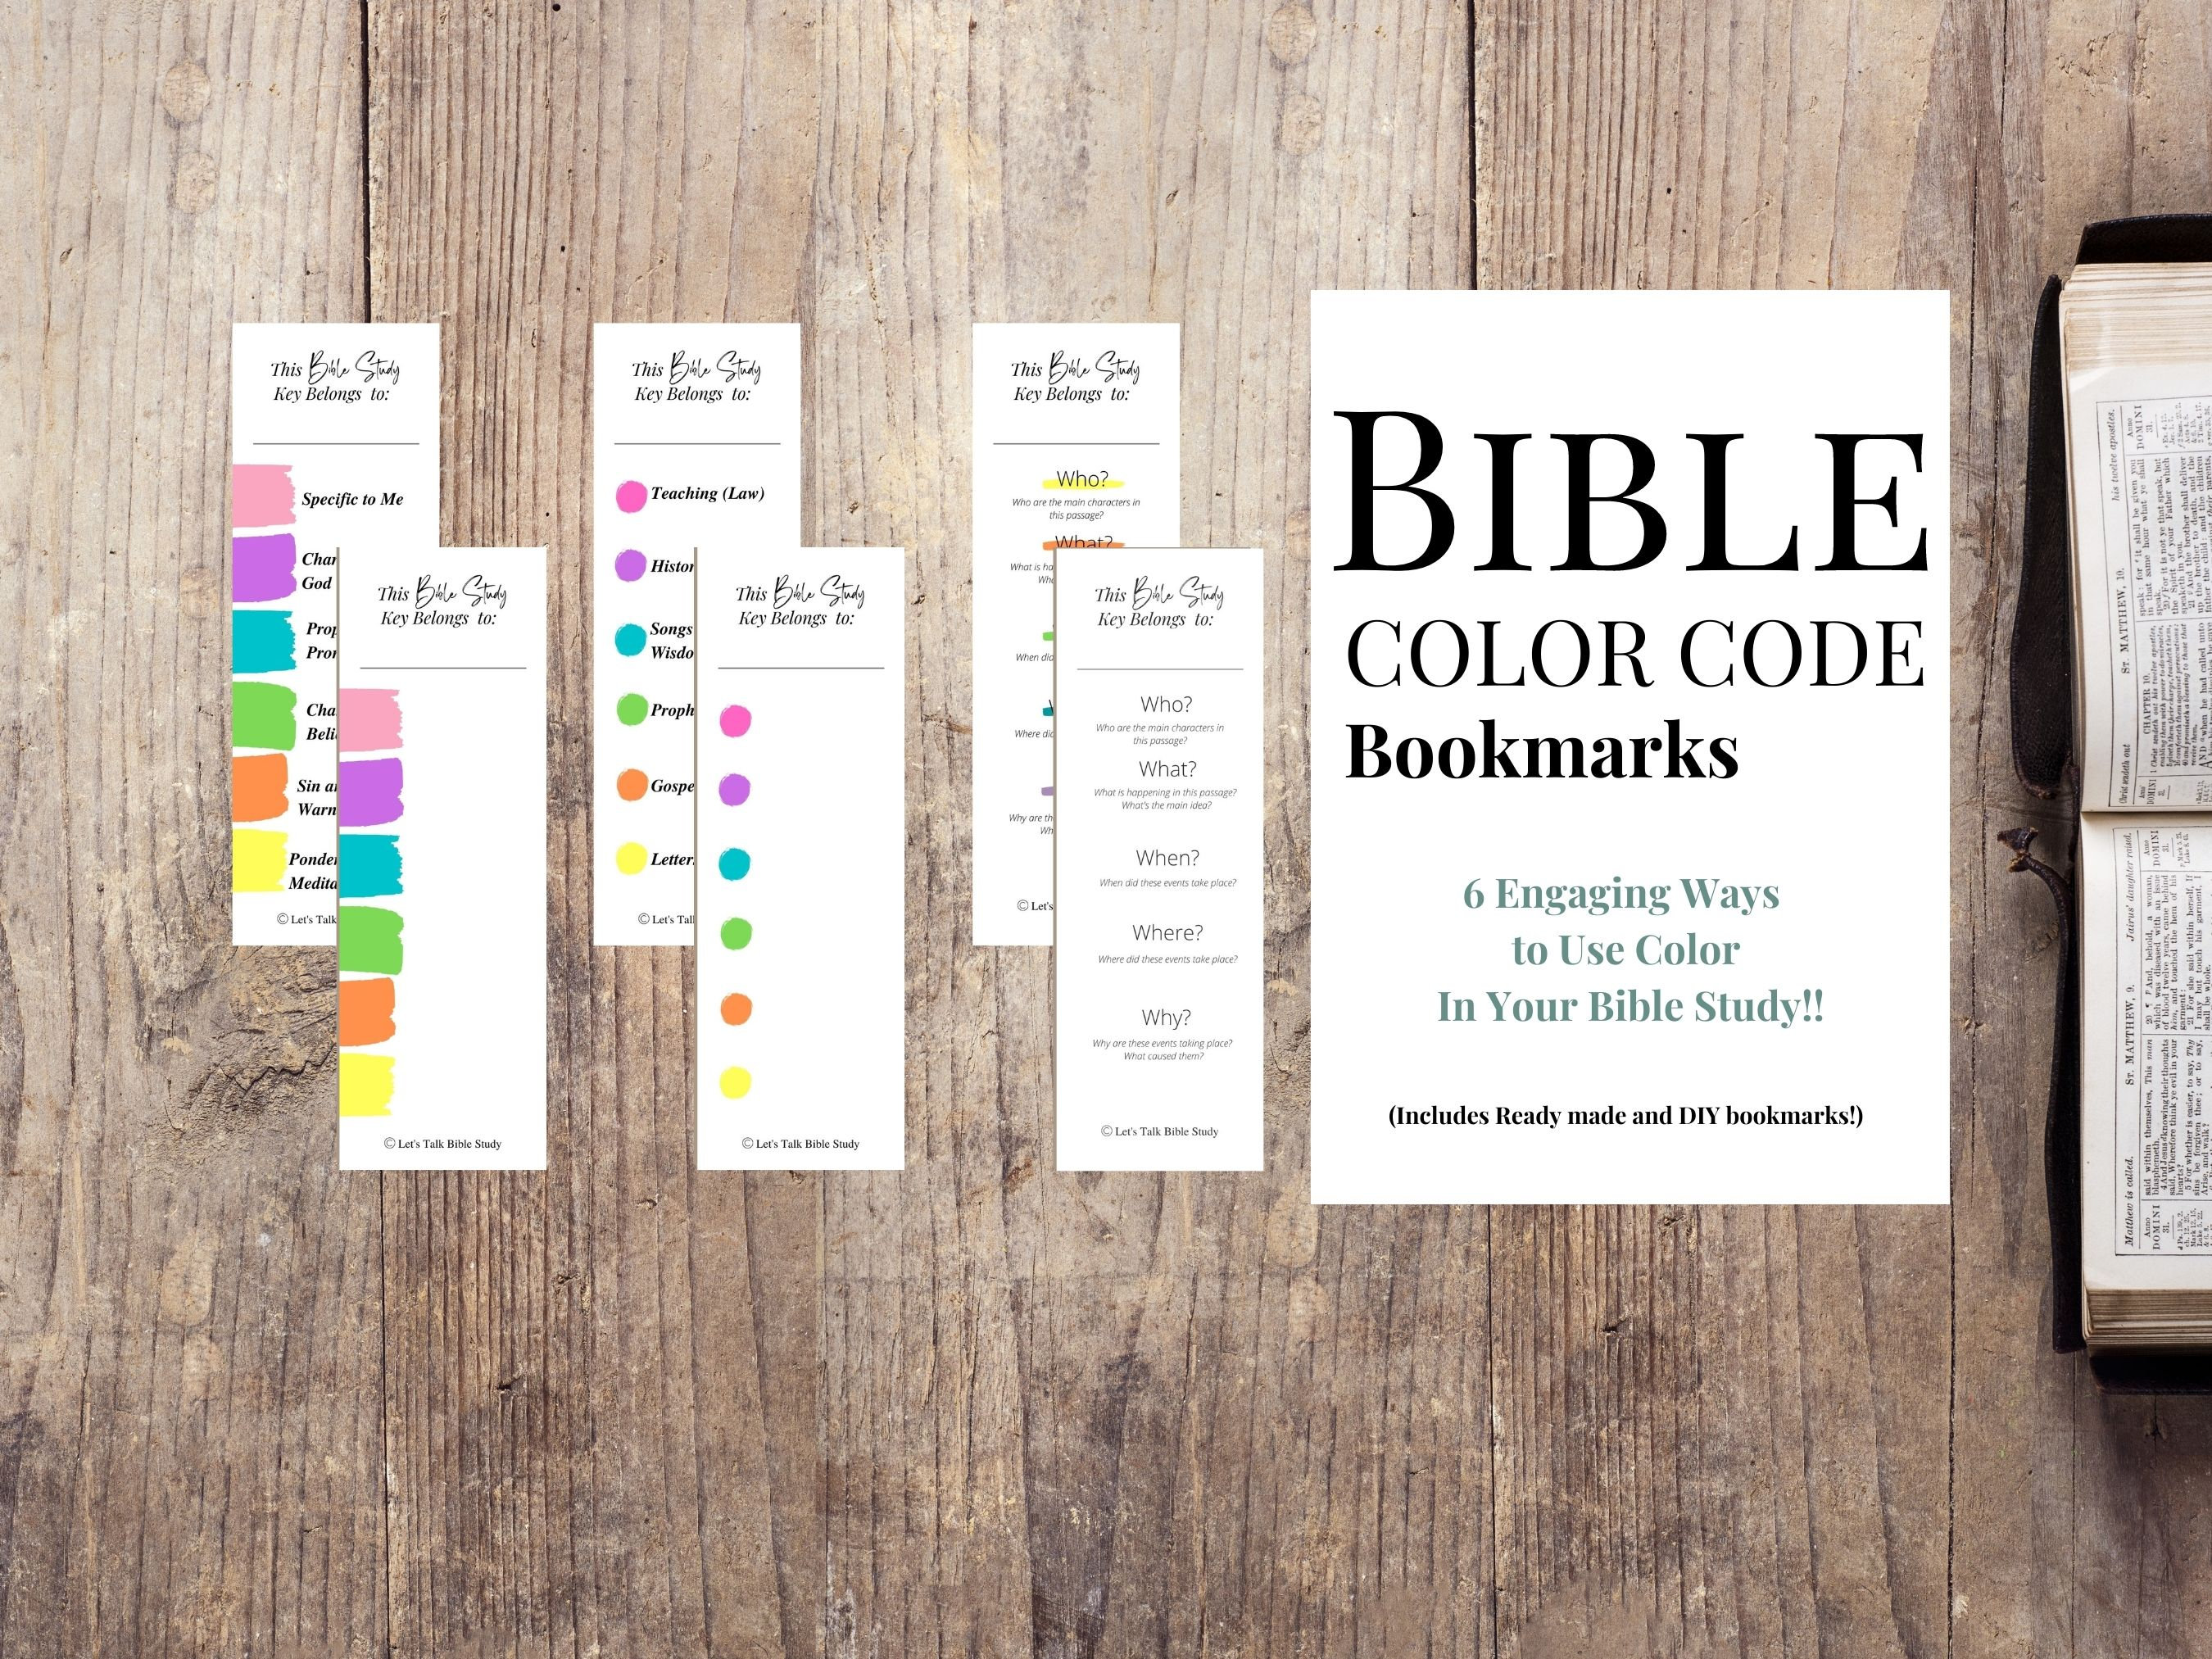 Bible Coloring Book for Boys: Christian Bible Verse Coloring Book for Boys  - Tailored for Toddlers, Kids, Teens, and Young Adults. by Mimi Doris,  Paperback